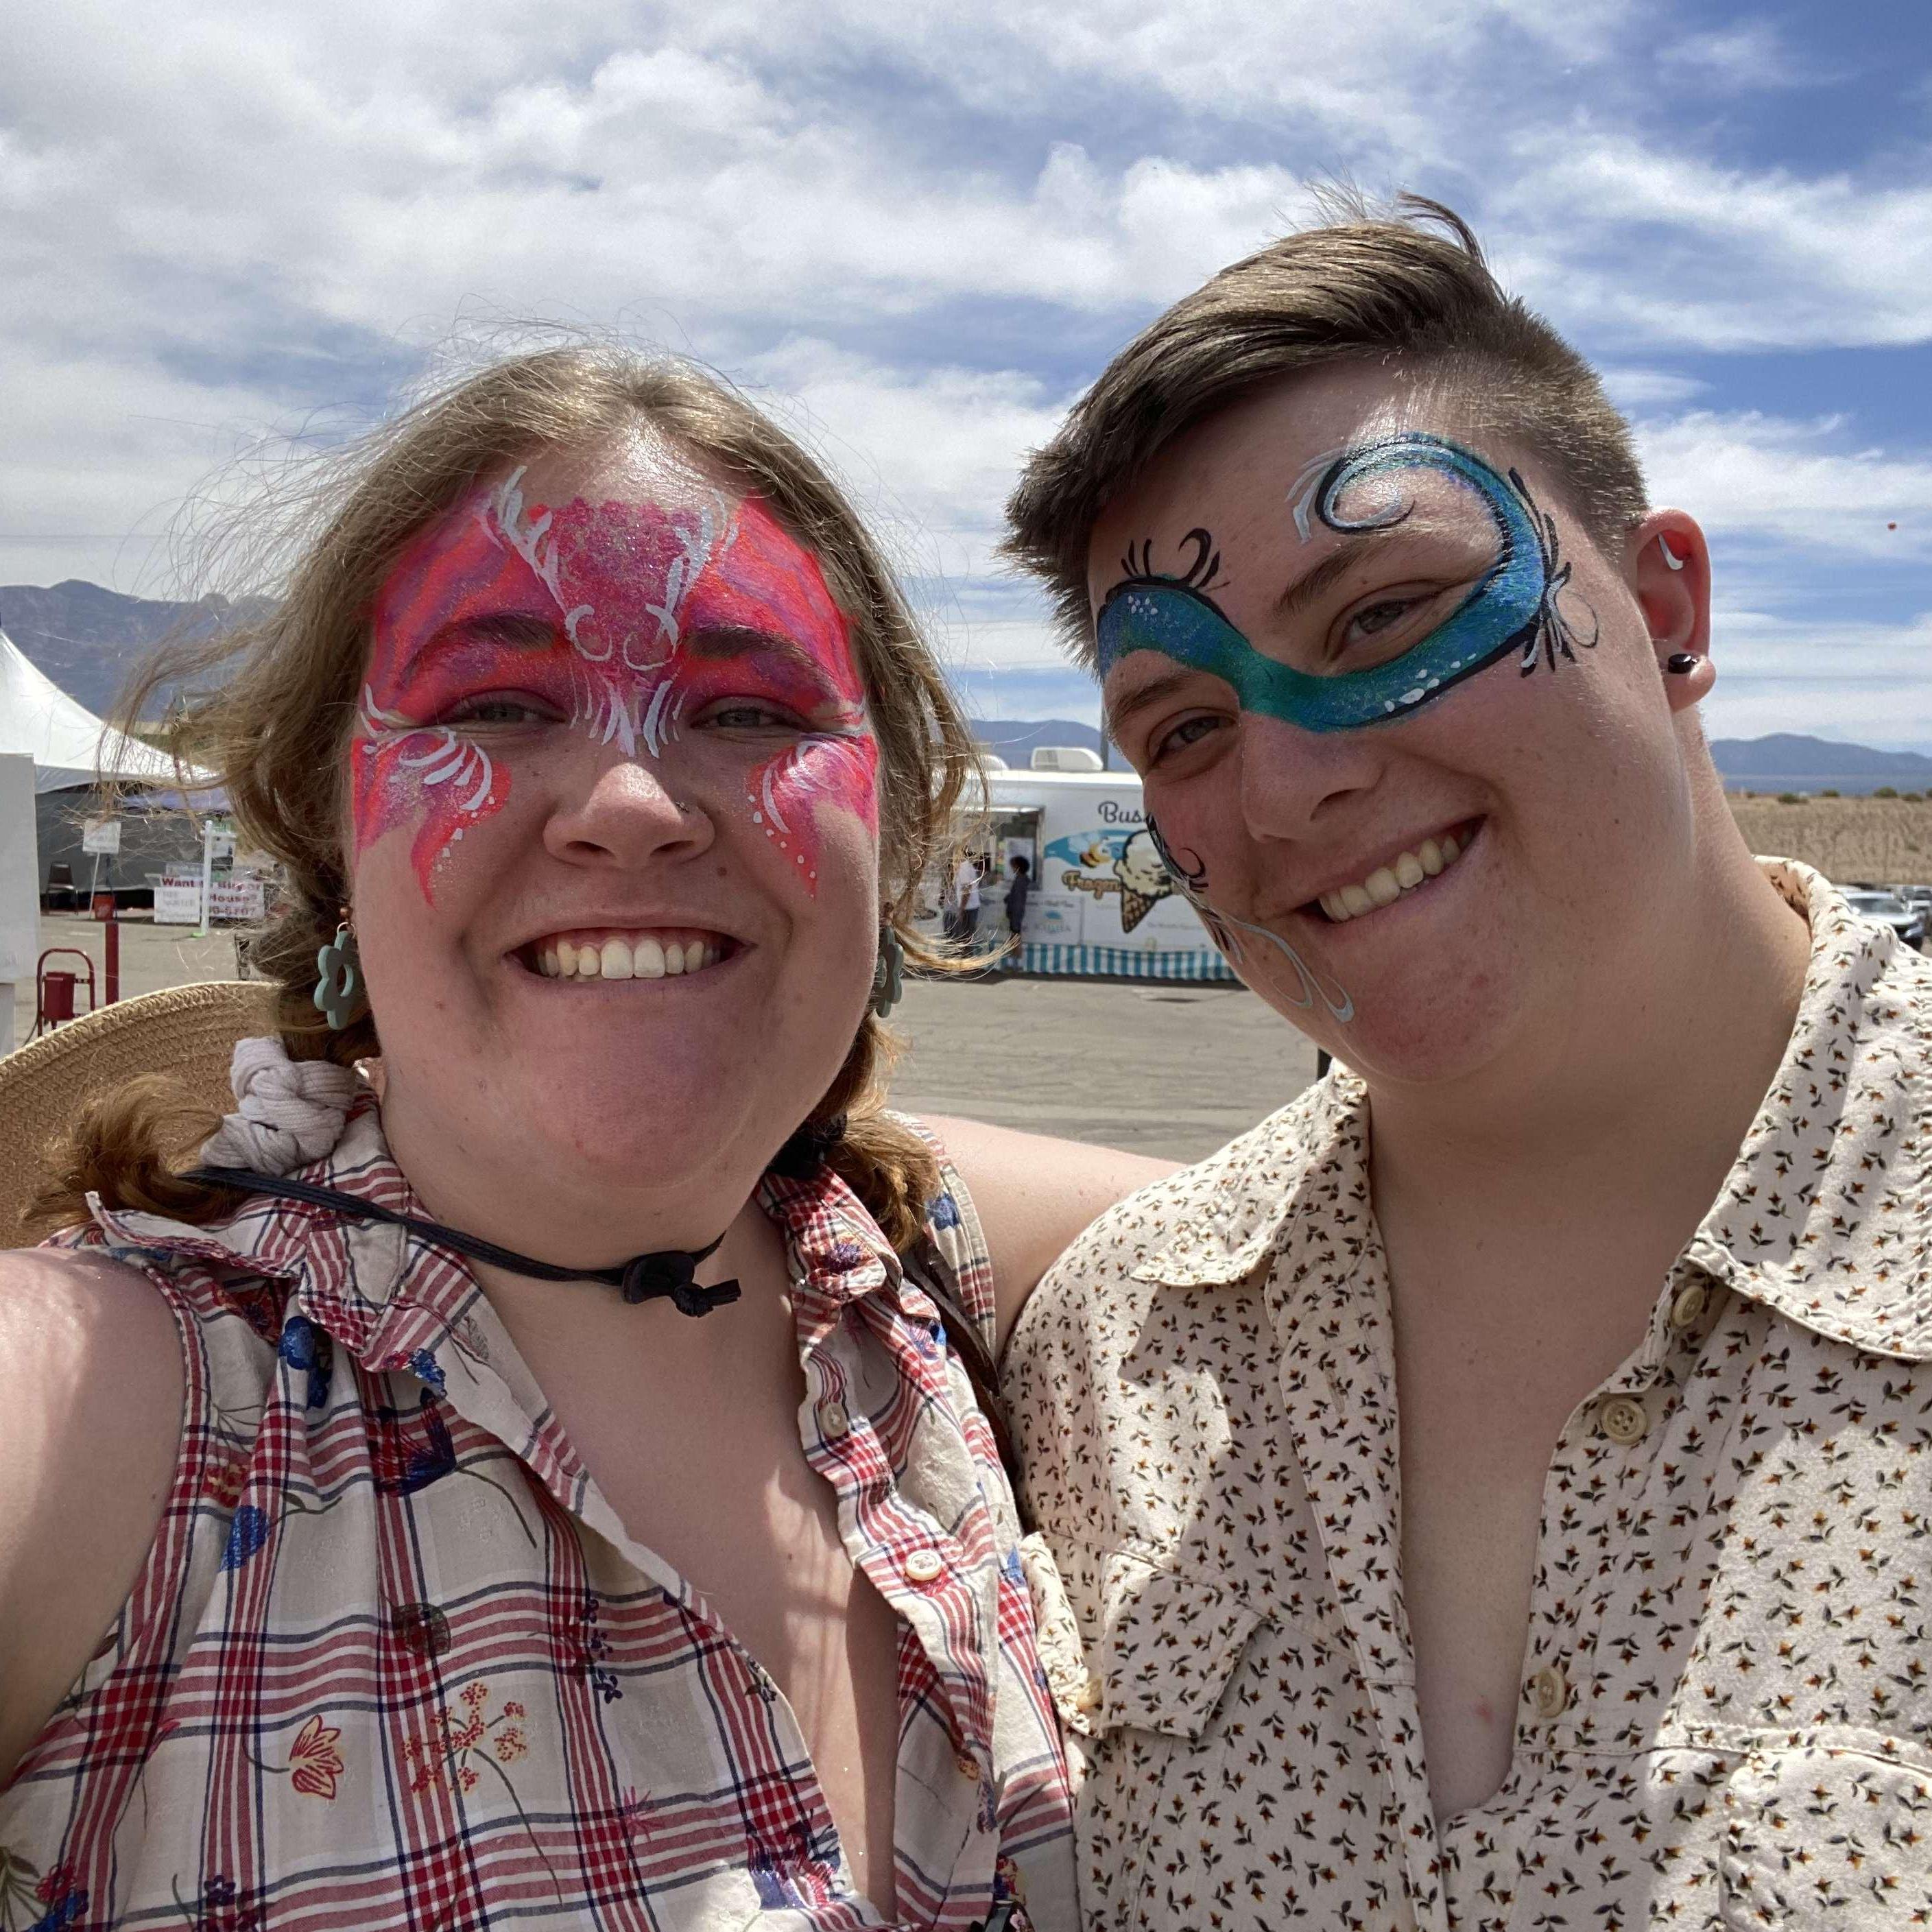 Quentin & Maryellen enjoyed getting face paint at the Albuquerque Celtic Festival. They enjoyed walking around with friends Kalynn and Kamau, listening to bagpipes and getting complements on our faces